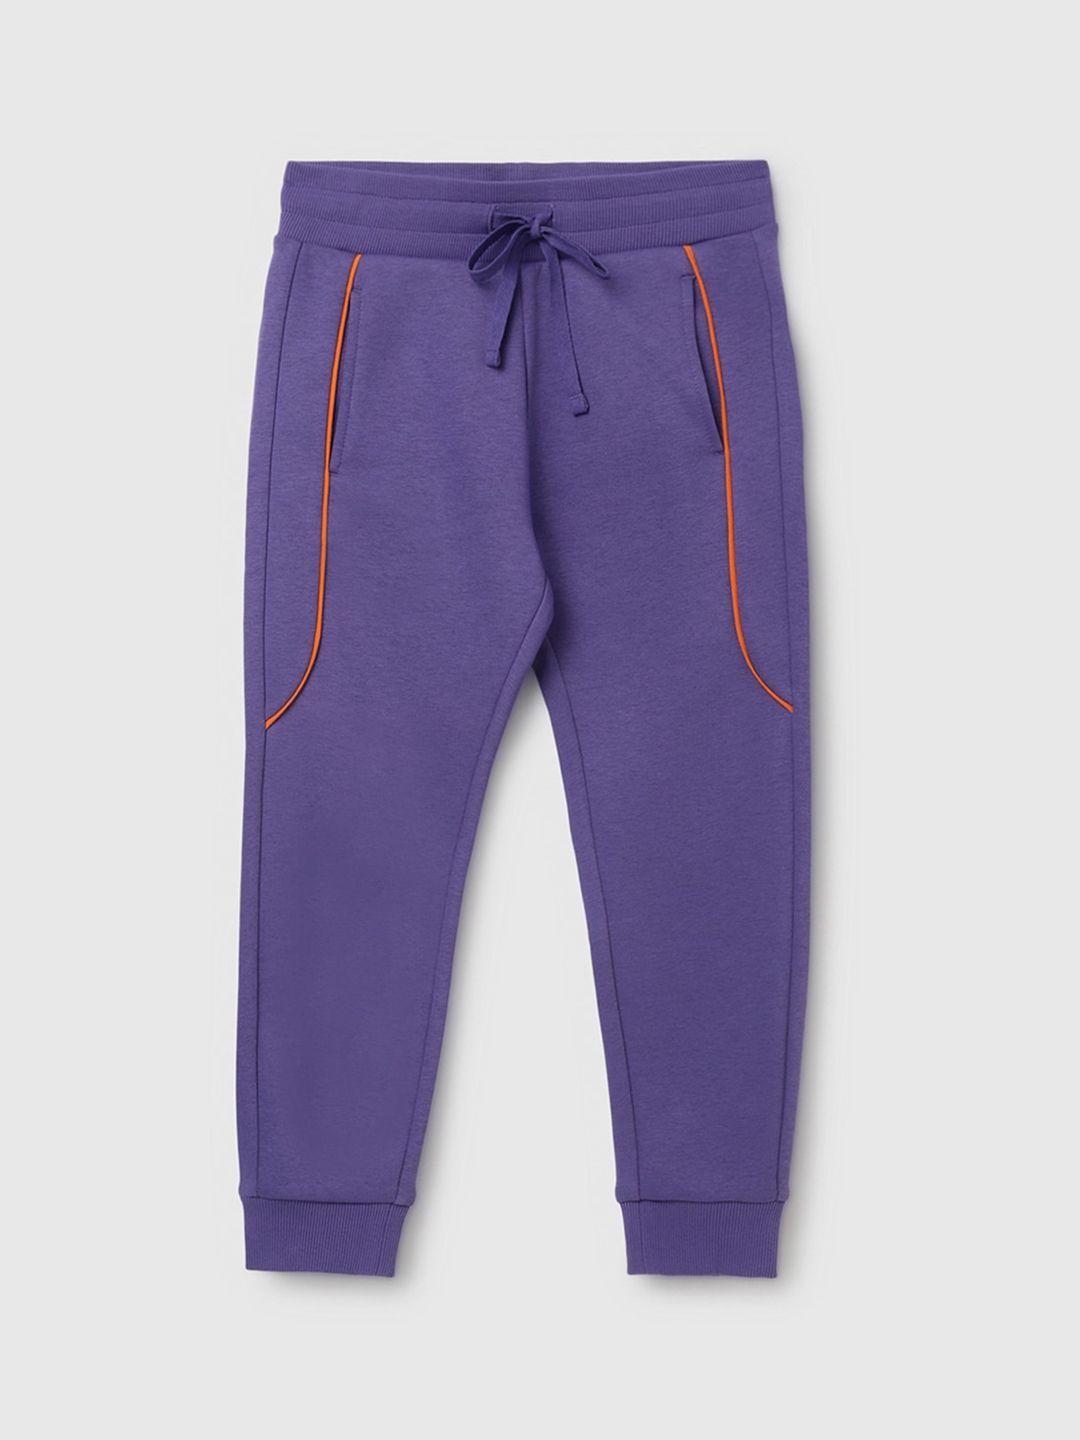 united colors of benetton boys mid-rise joggers